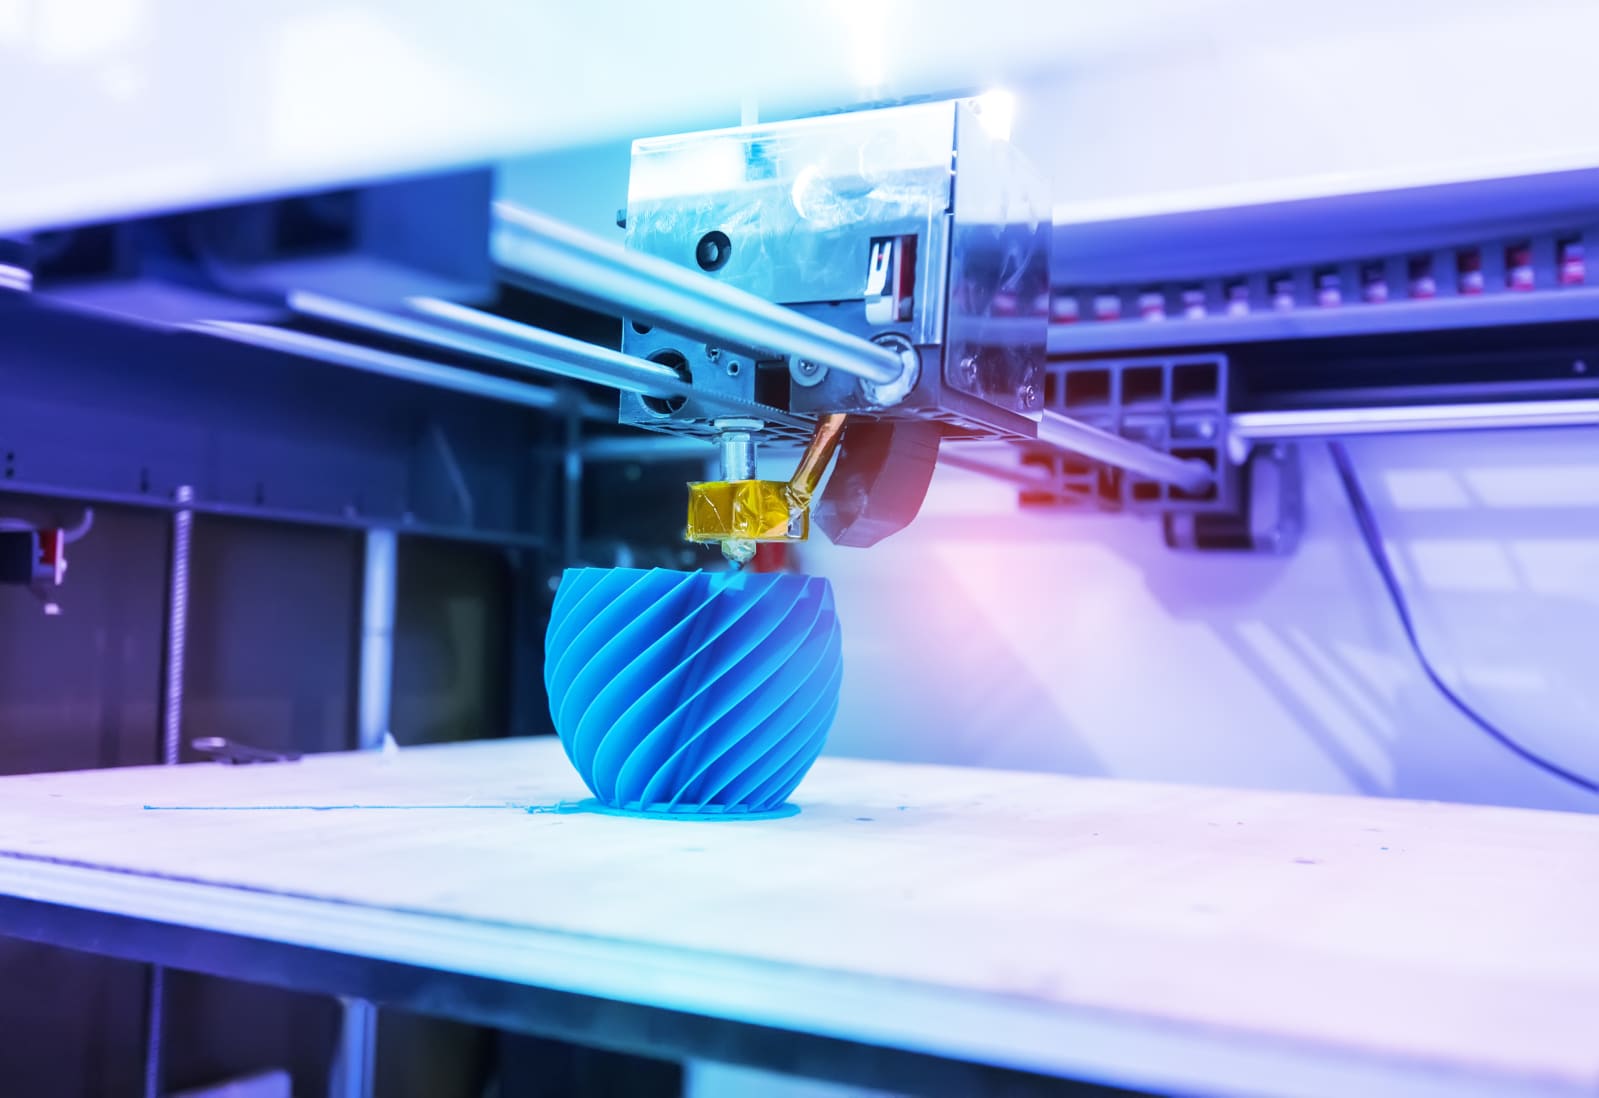 3D printing systems